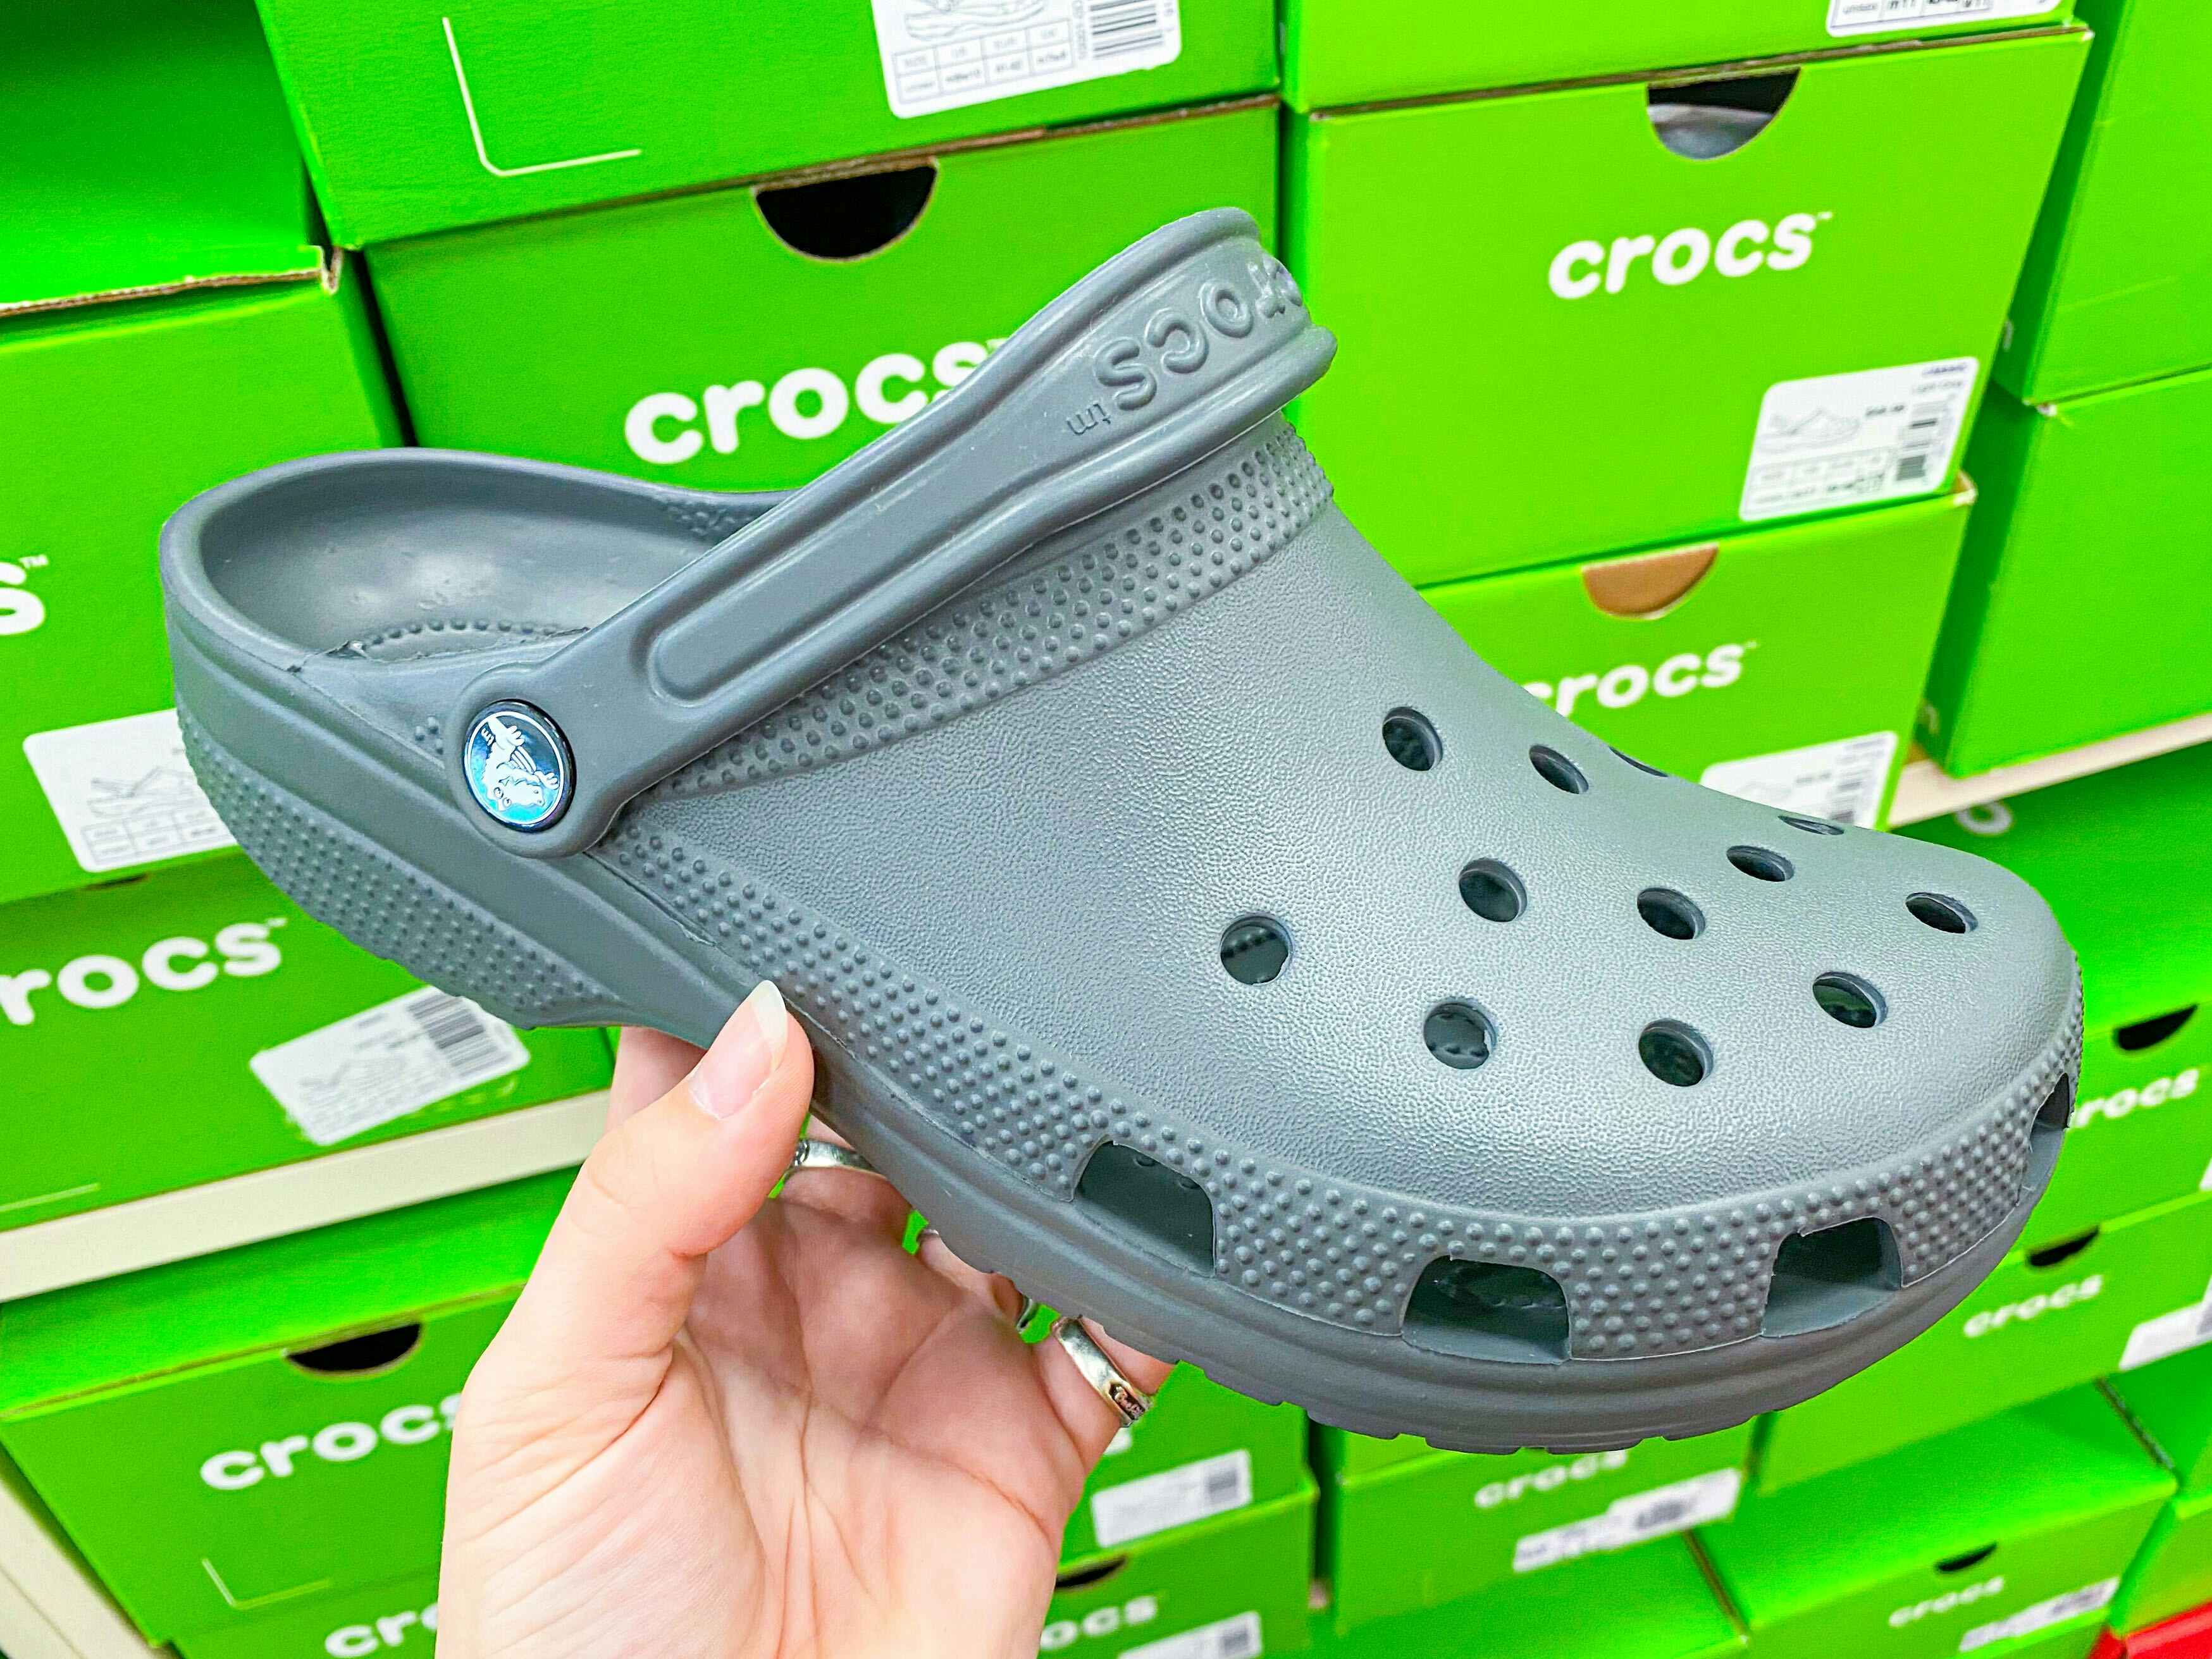 Bestselling Croc Clogs, Only $24.99 at Walmart